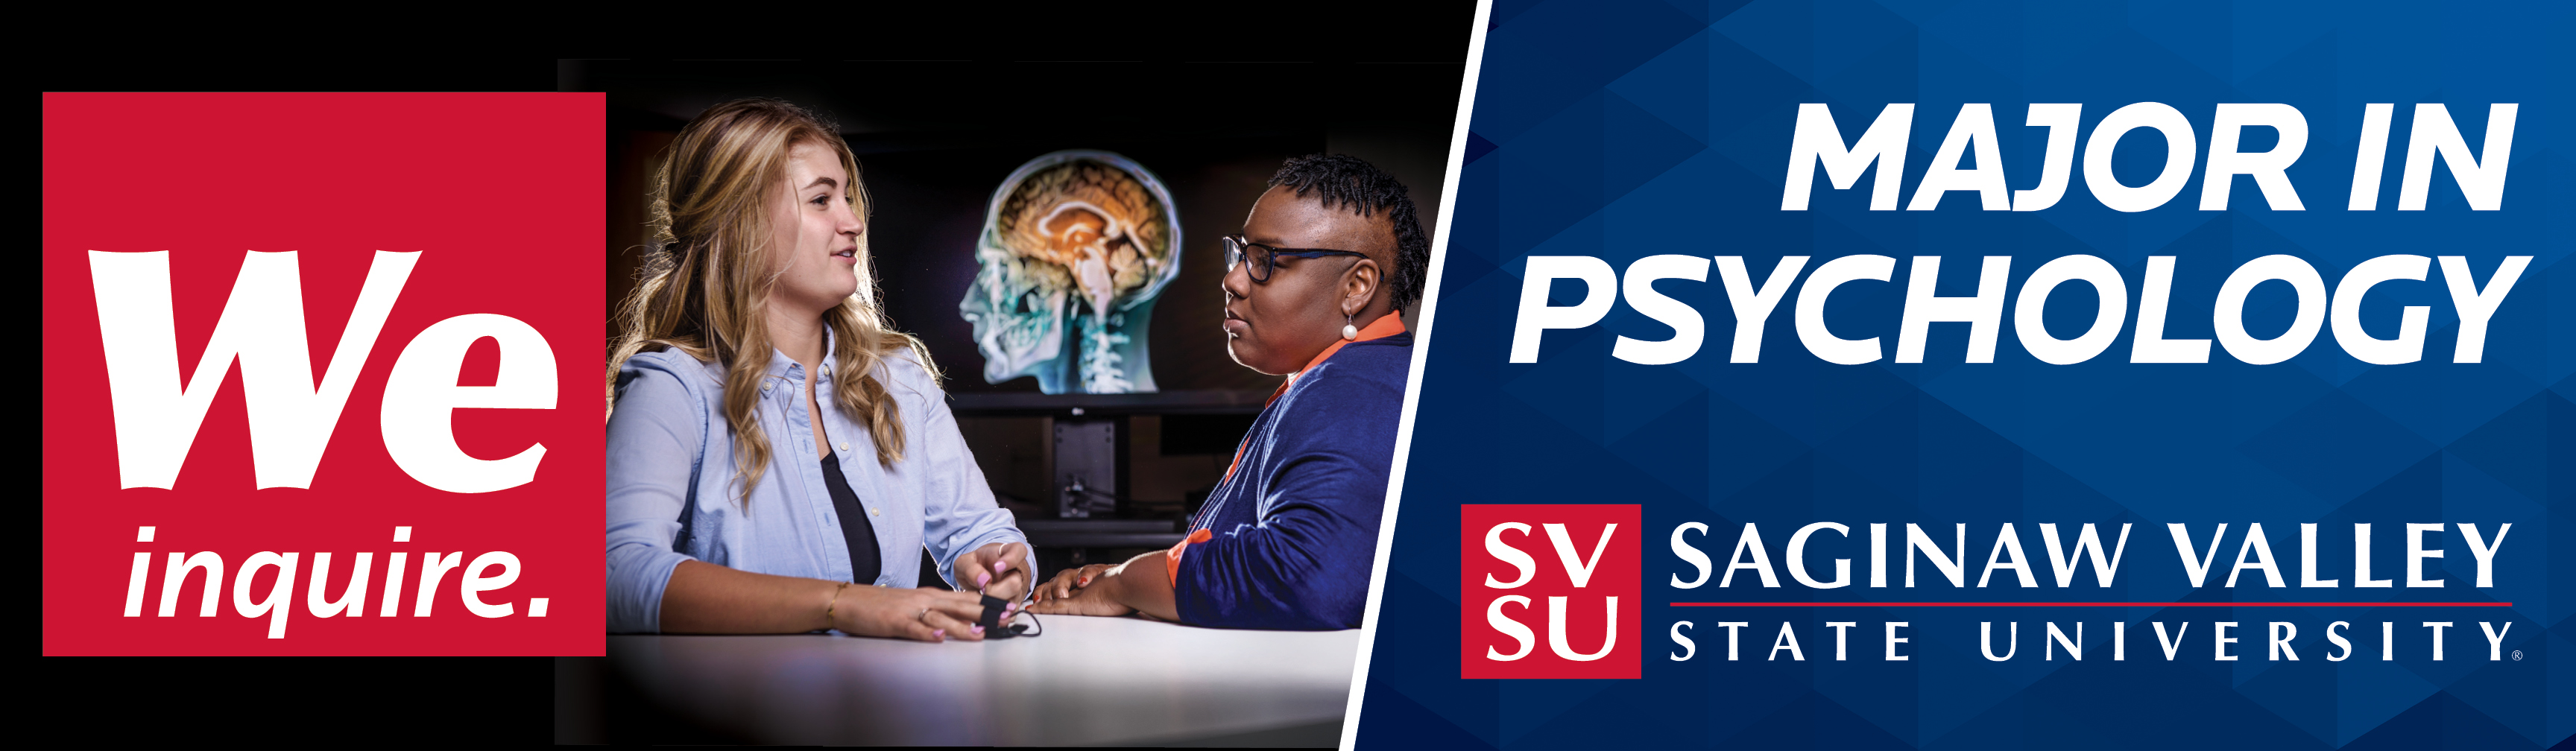 Banner graphic featuring red square block with We Inquire in white letters to left and featuring image of faculty member and student with image of brain in the background.